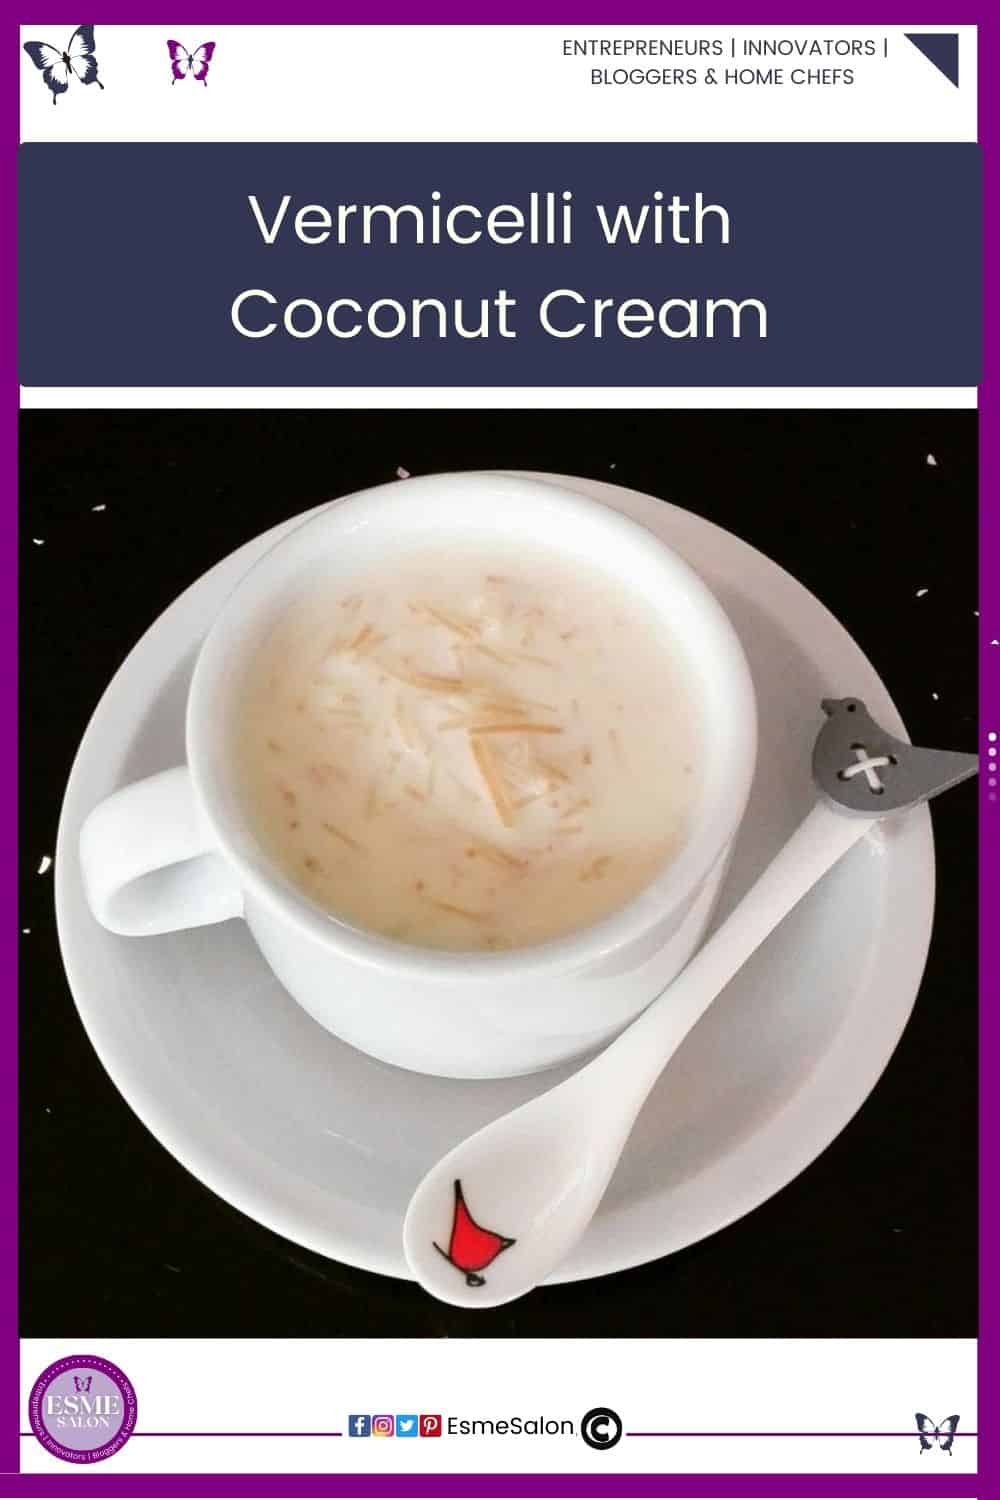 an image of a white mug and saucer, with a spoon and filled with Vermicelli with Coconut Cream